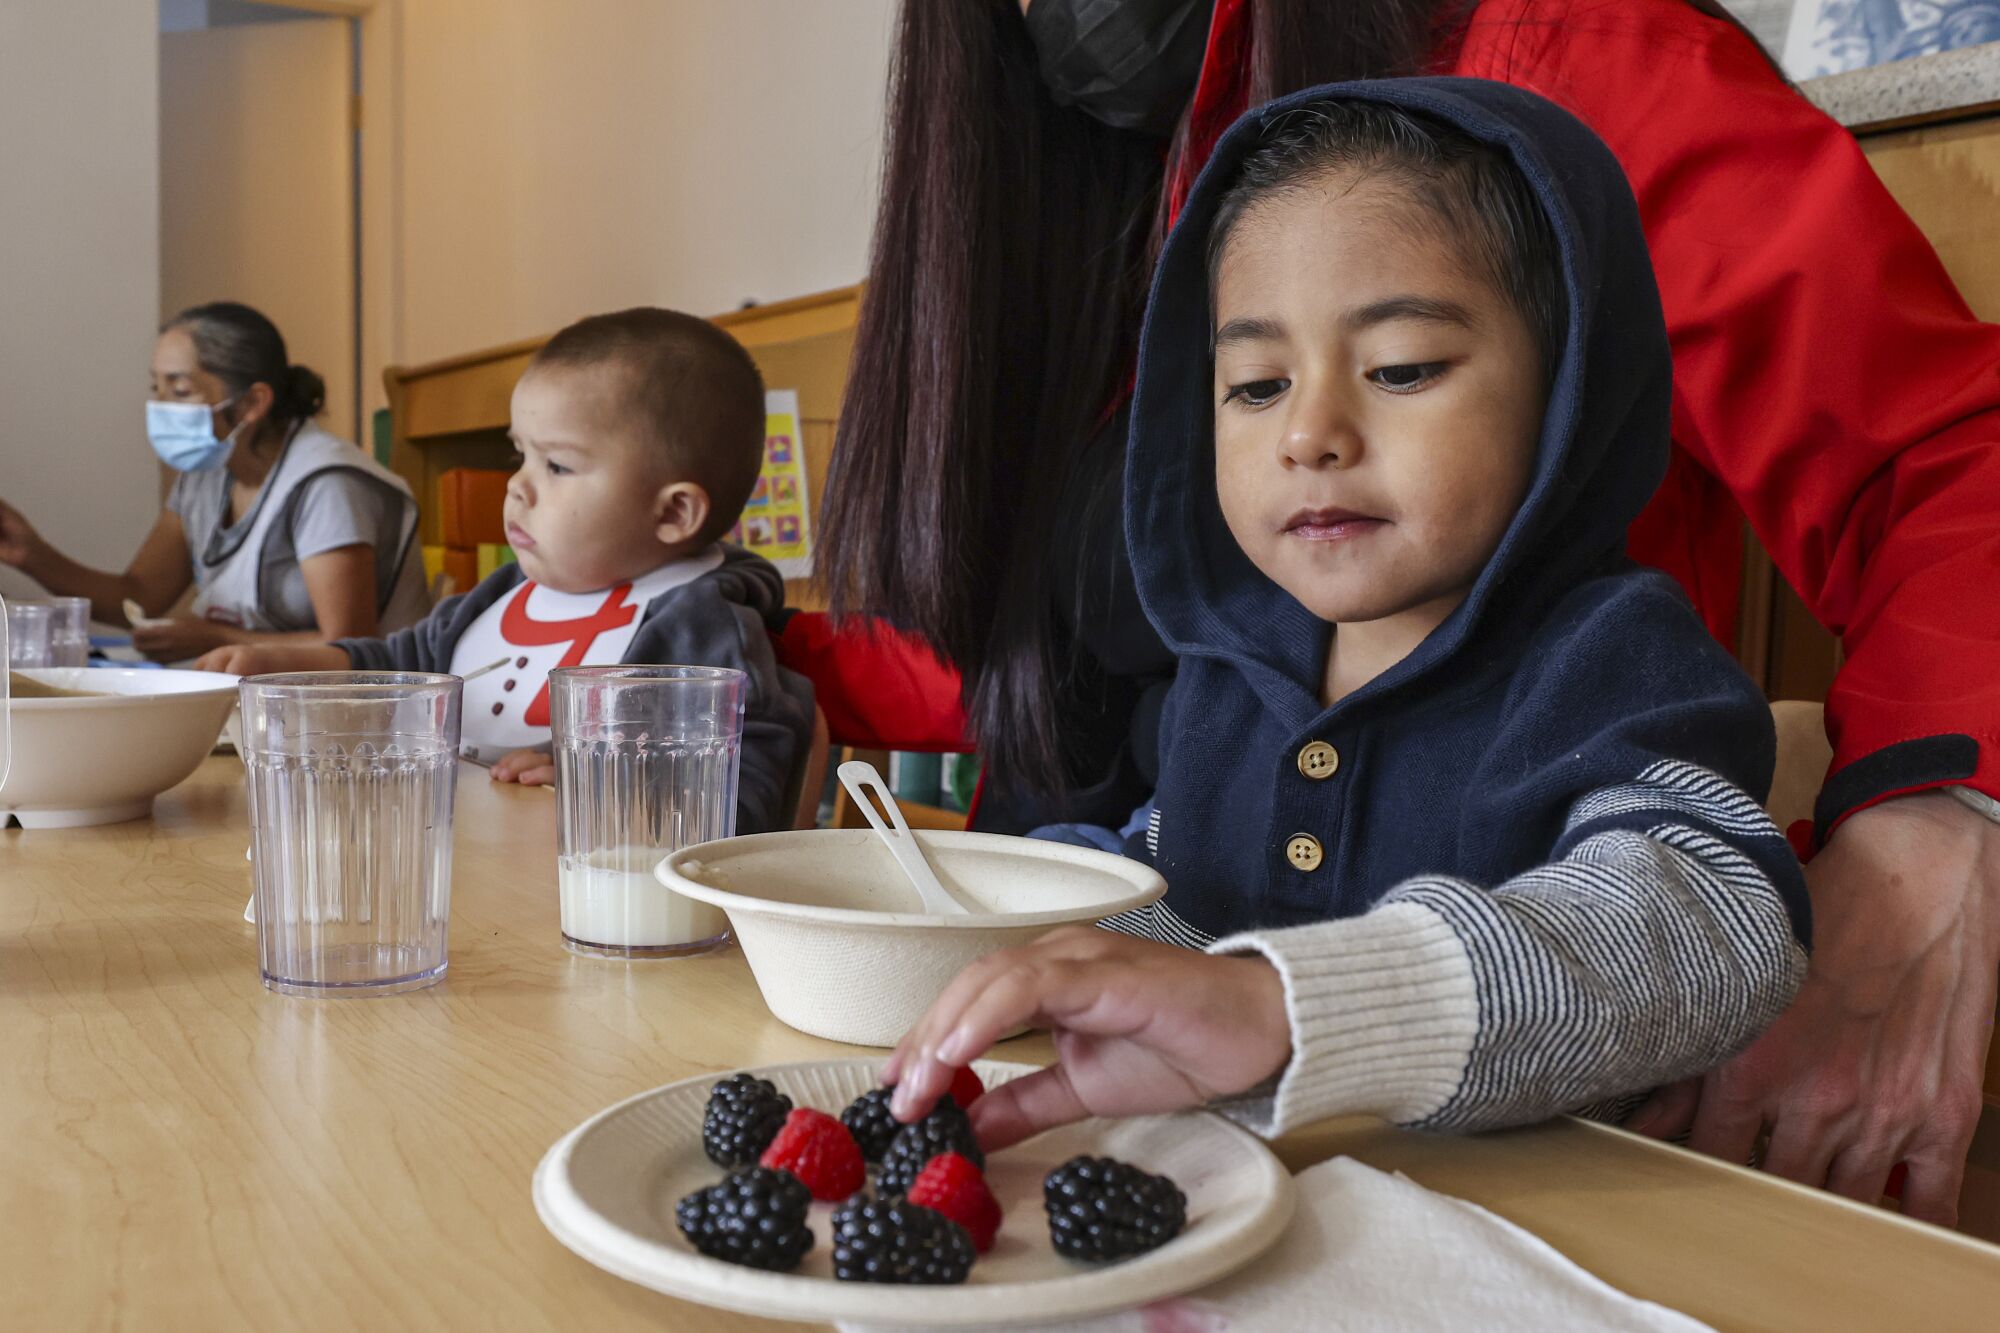 Adriel, 3, eats some berries with the other children whom child care provider Miren Algorri, standing, serves at her home.